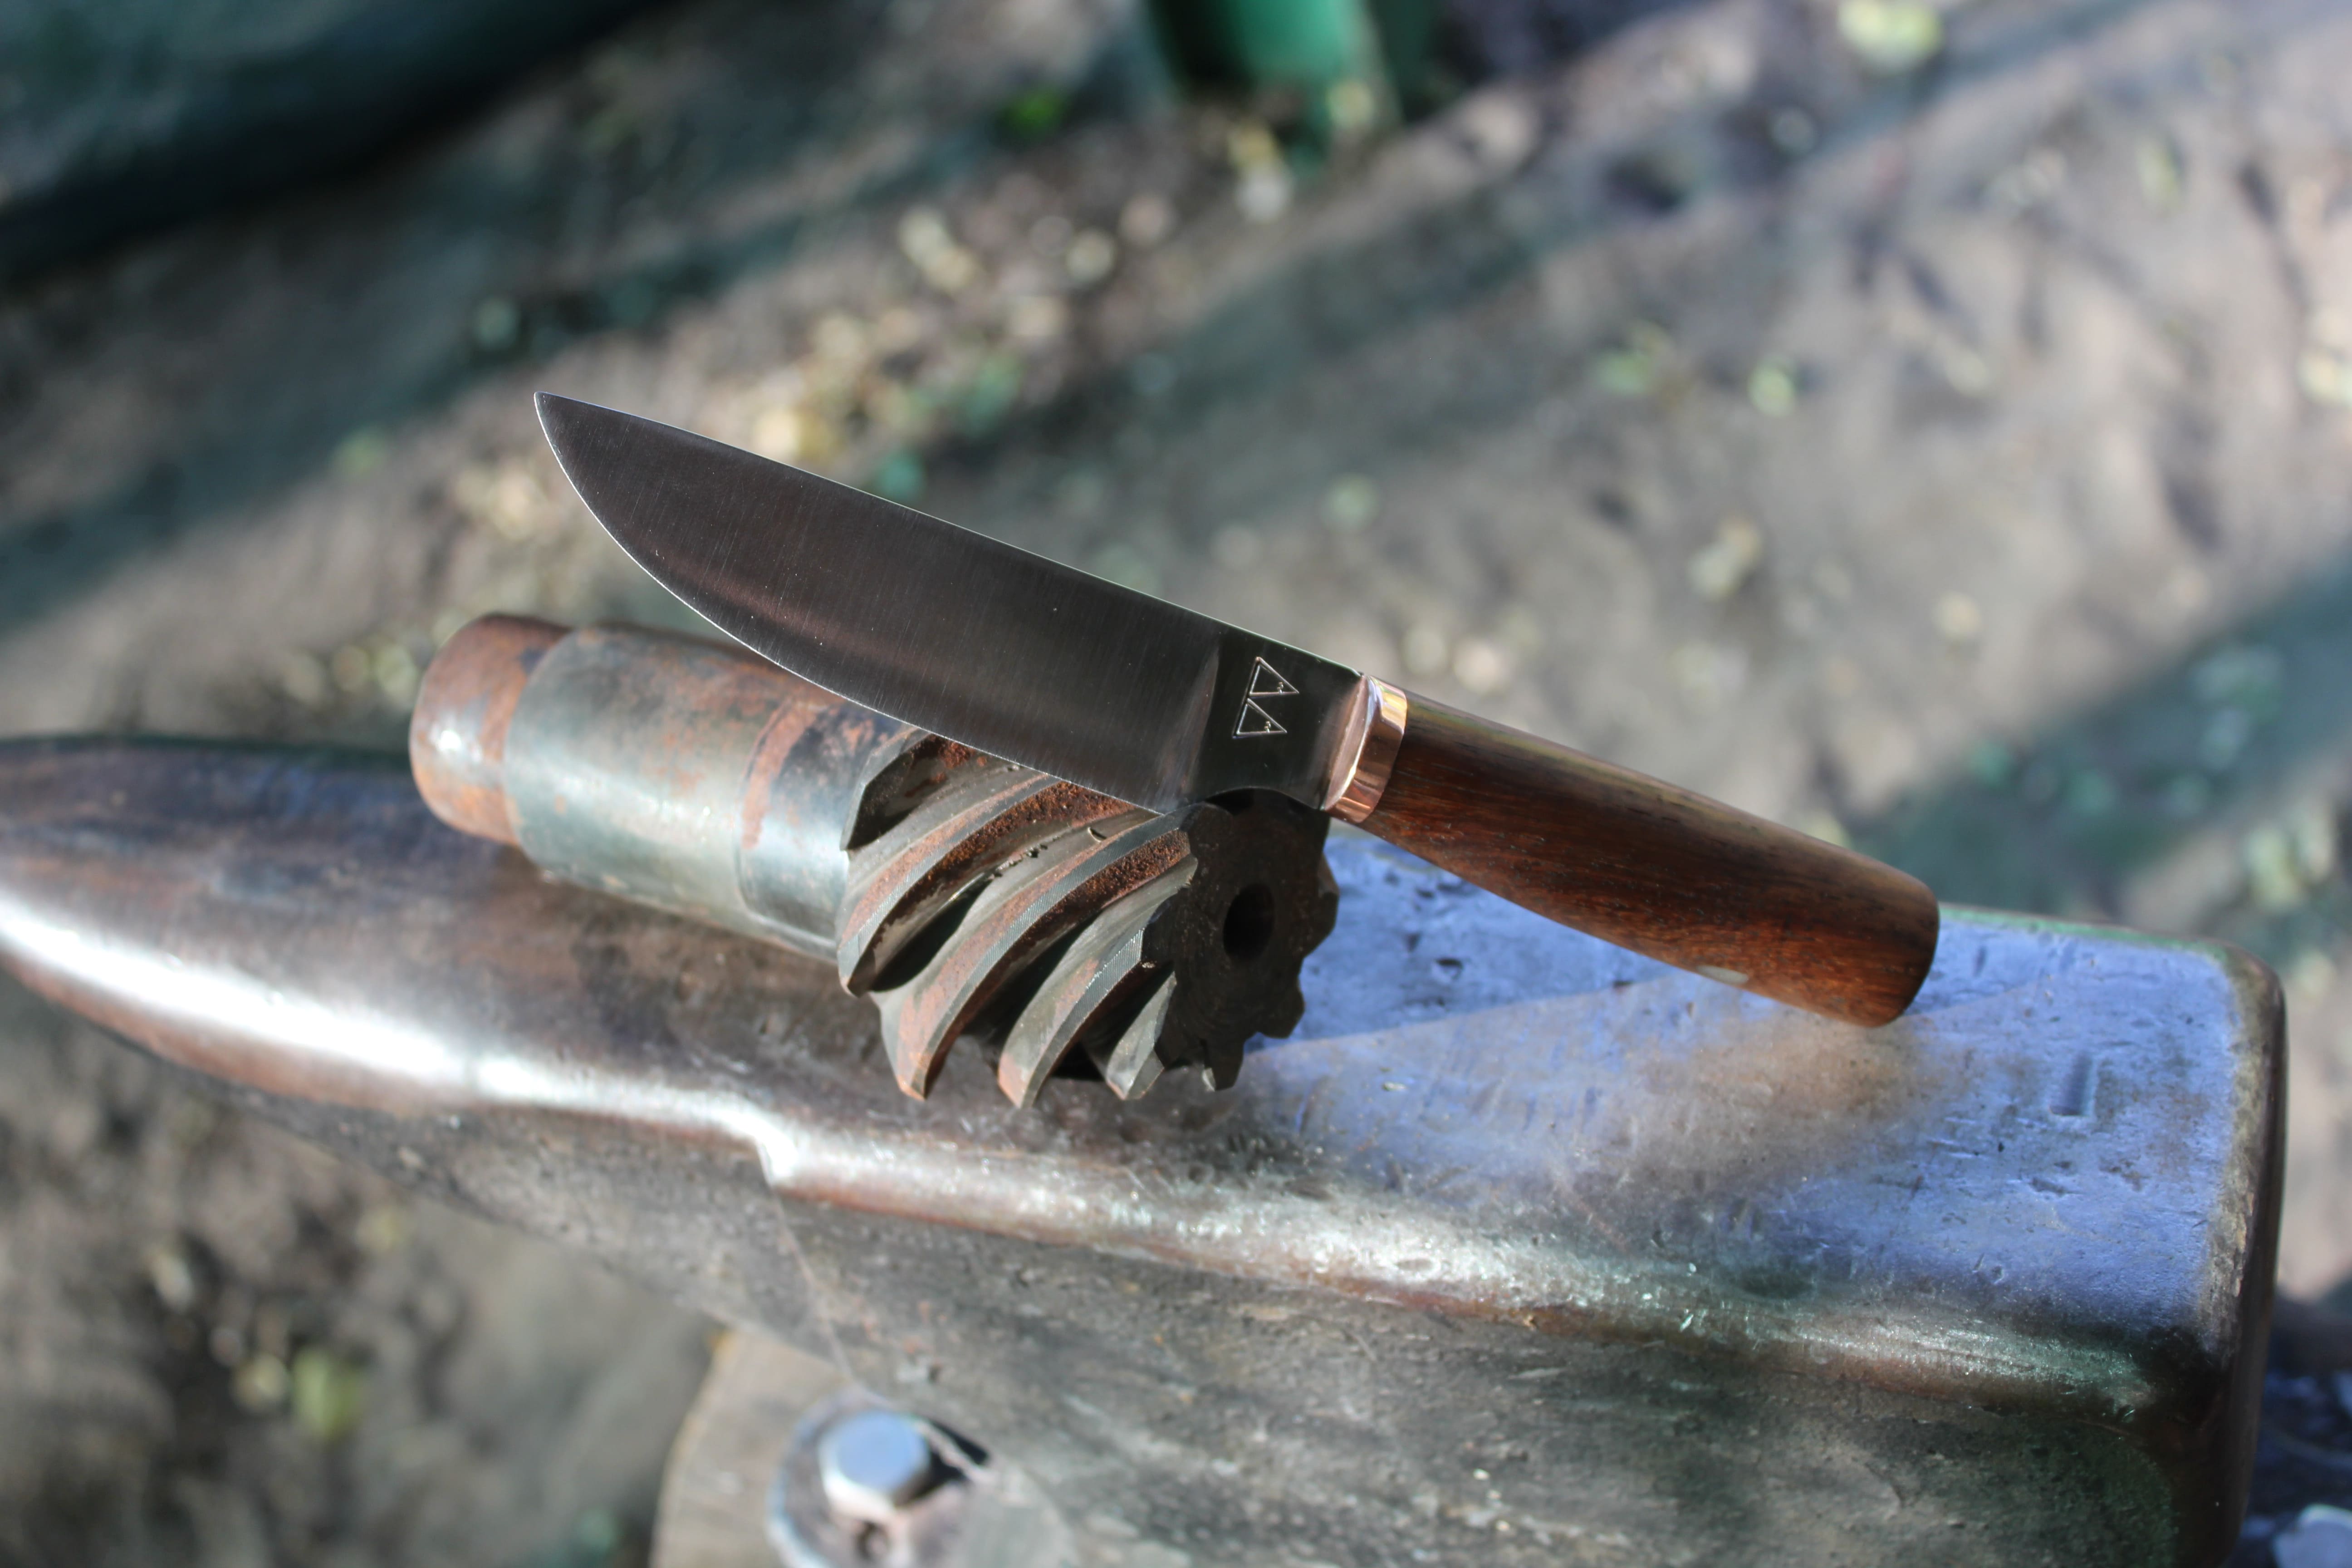 A custom skinning knife with a Mukwa handle and copper bolster.